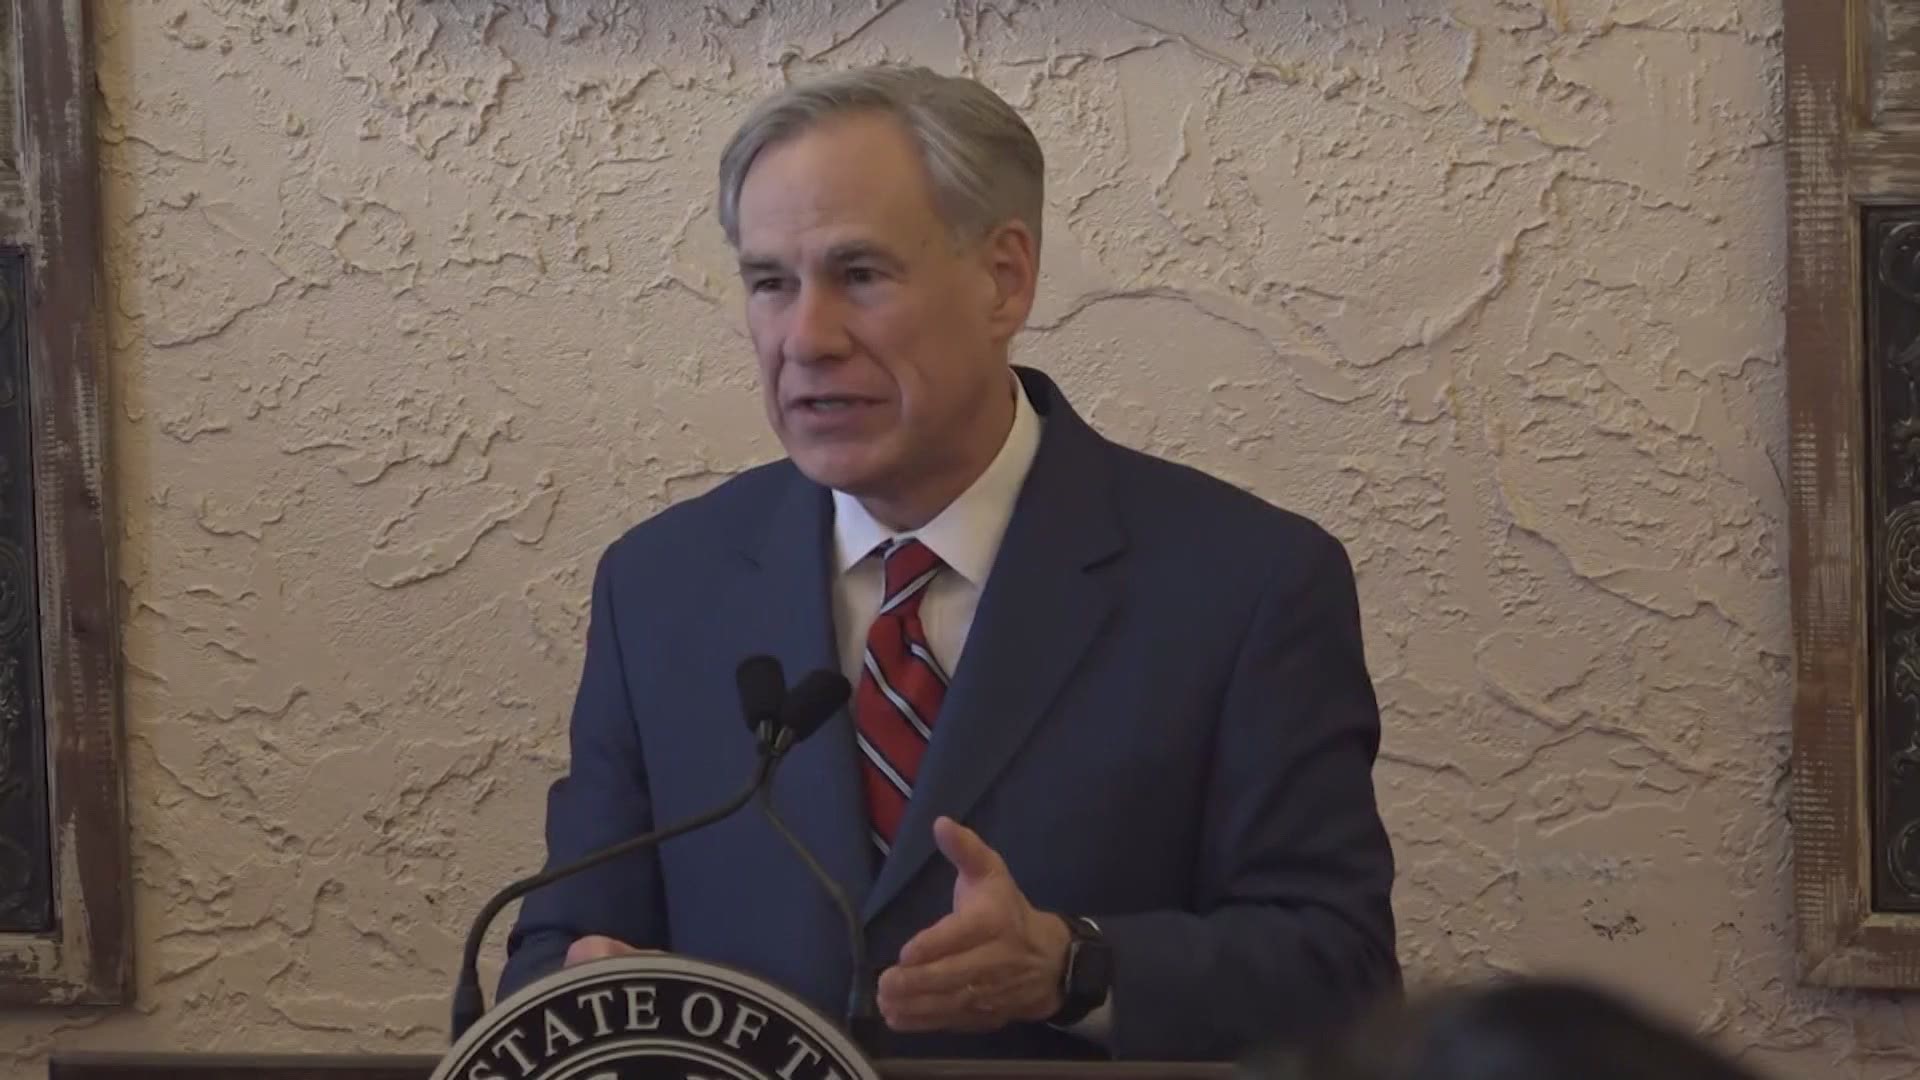 Many Houston area leaders are critical of Texas Governor Greg Abbott’s decision to lift most statewide COVID restrictions while others say it's long overdue.